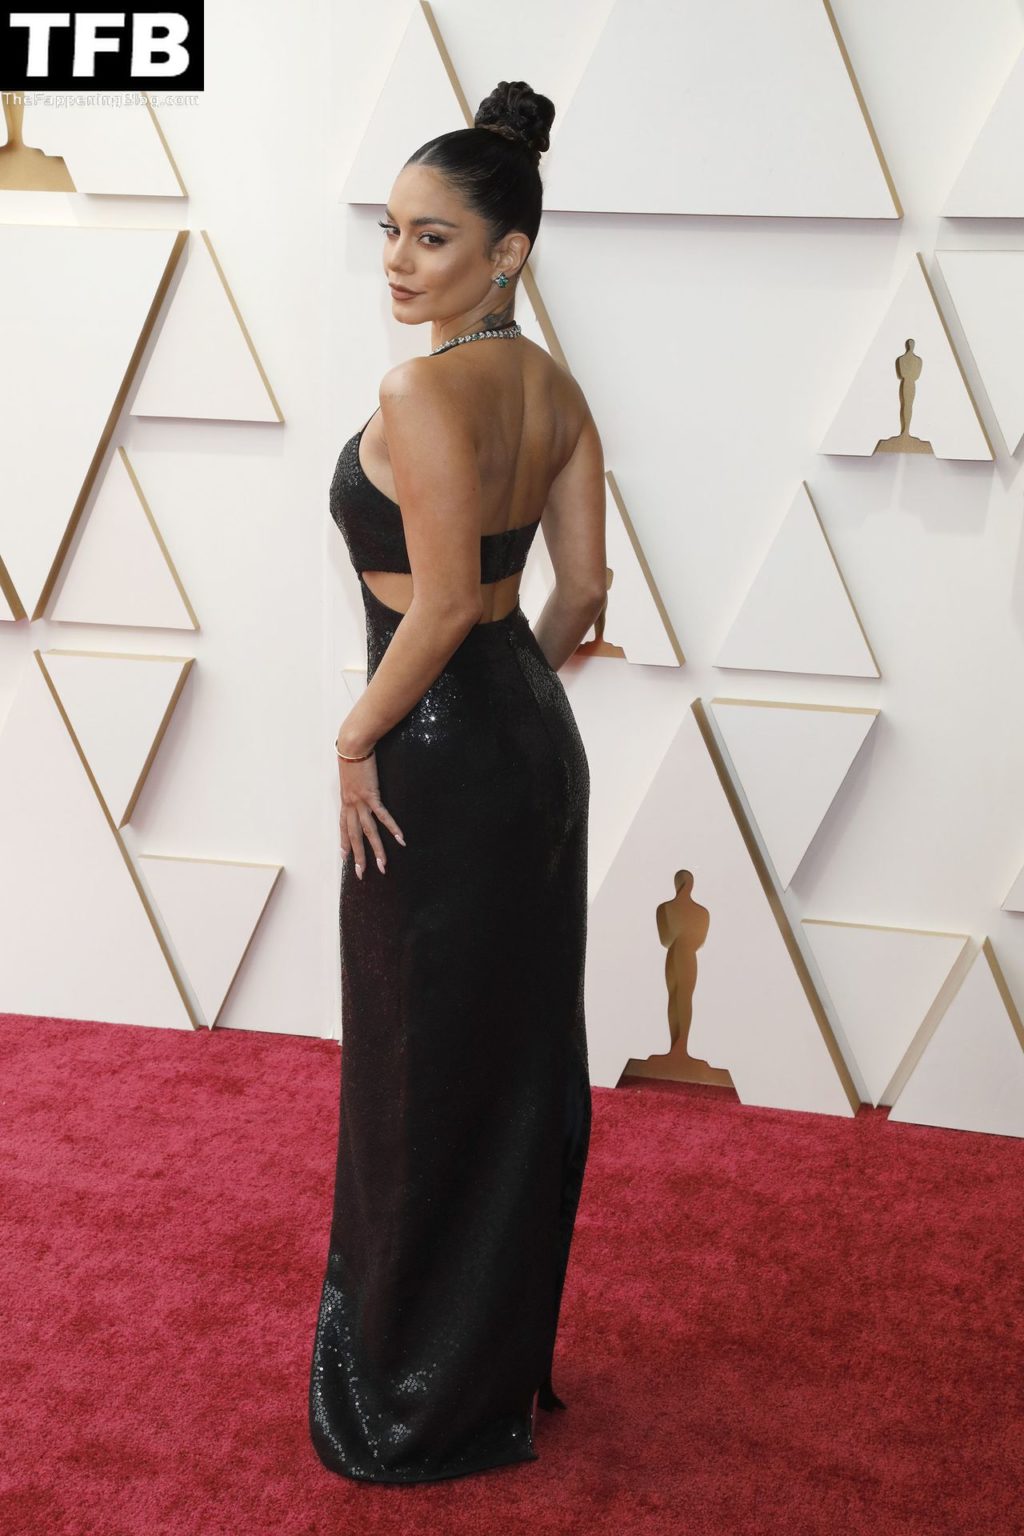 Vanessa Hudgens Sexy The Fappening Blog 70 2 1024x1536 - Vanessa Hudgens Poses on the Red Carpet at the 94th Annual Academy Awards (83 Photos)